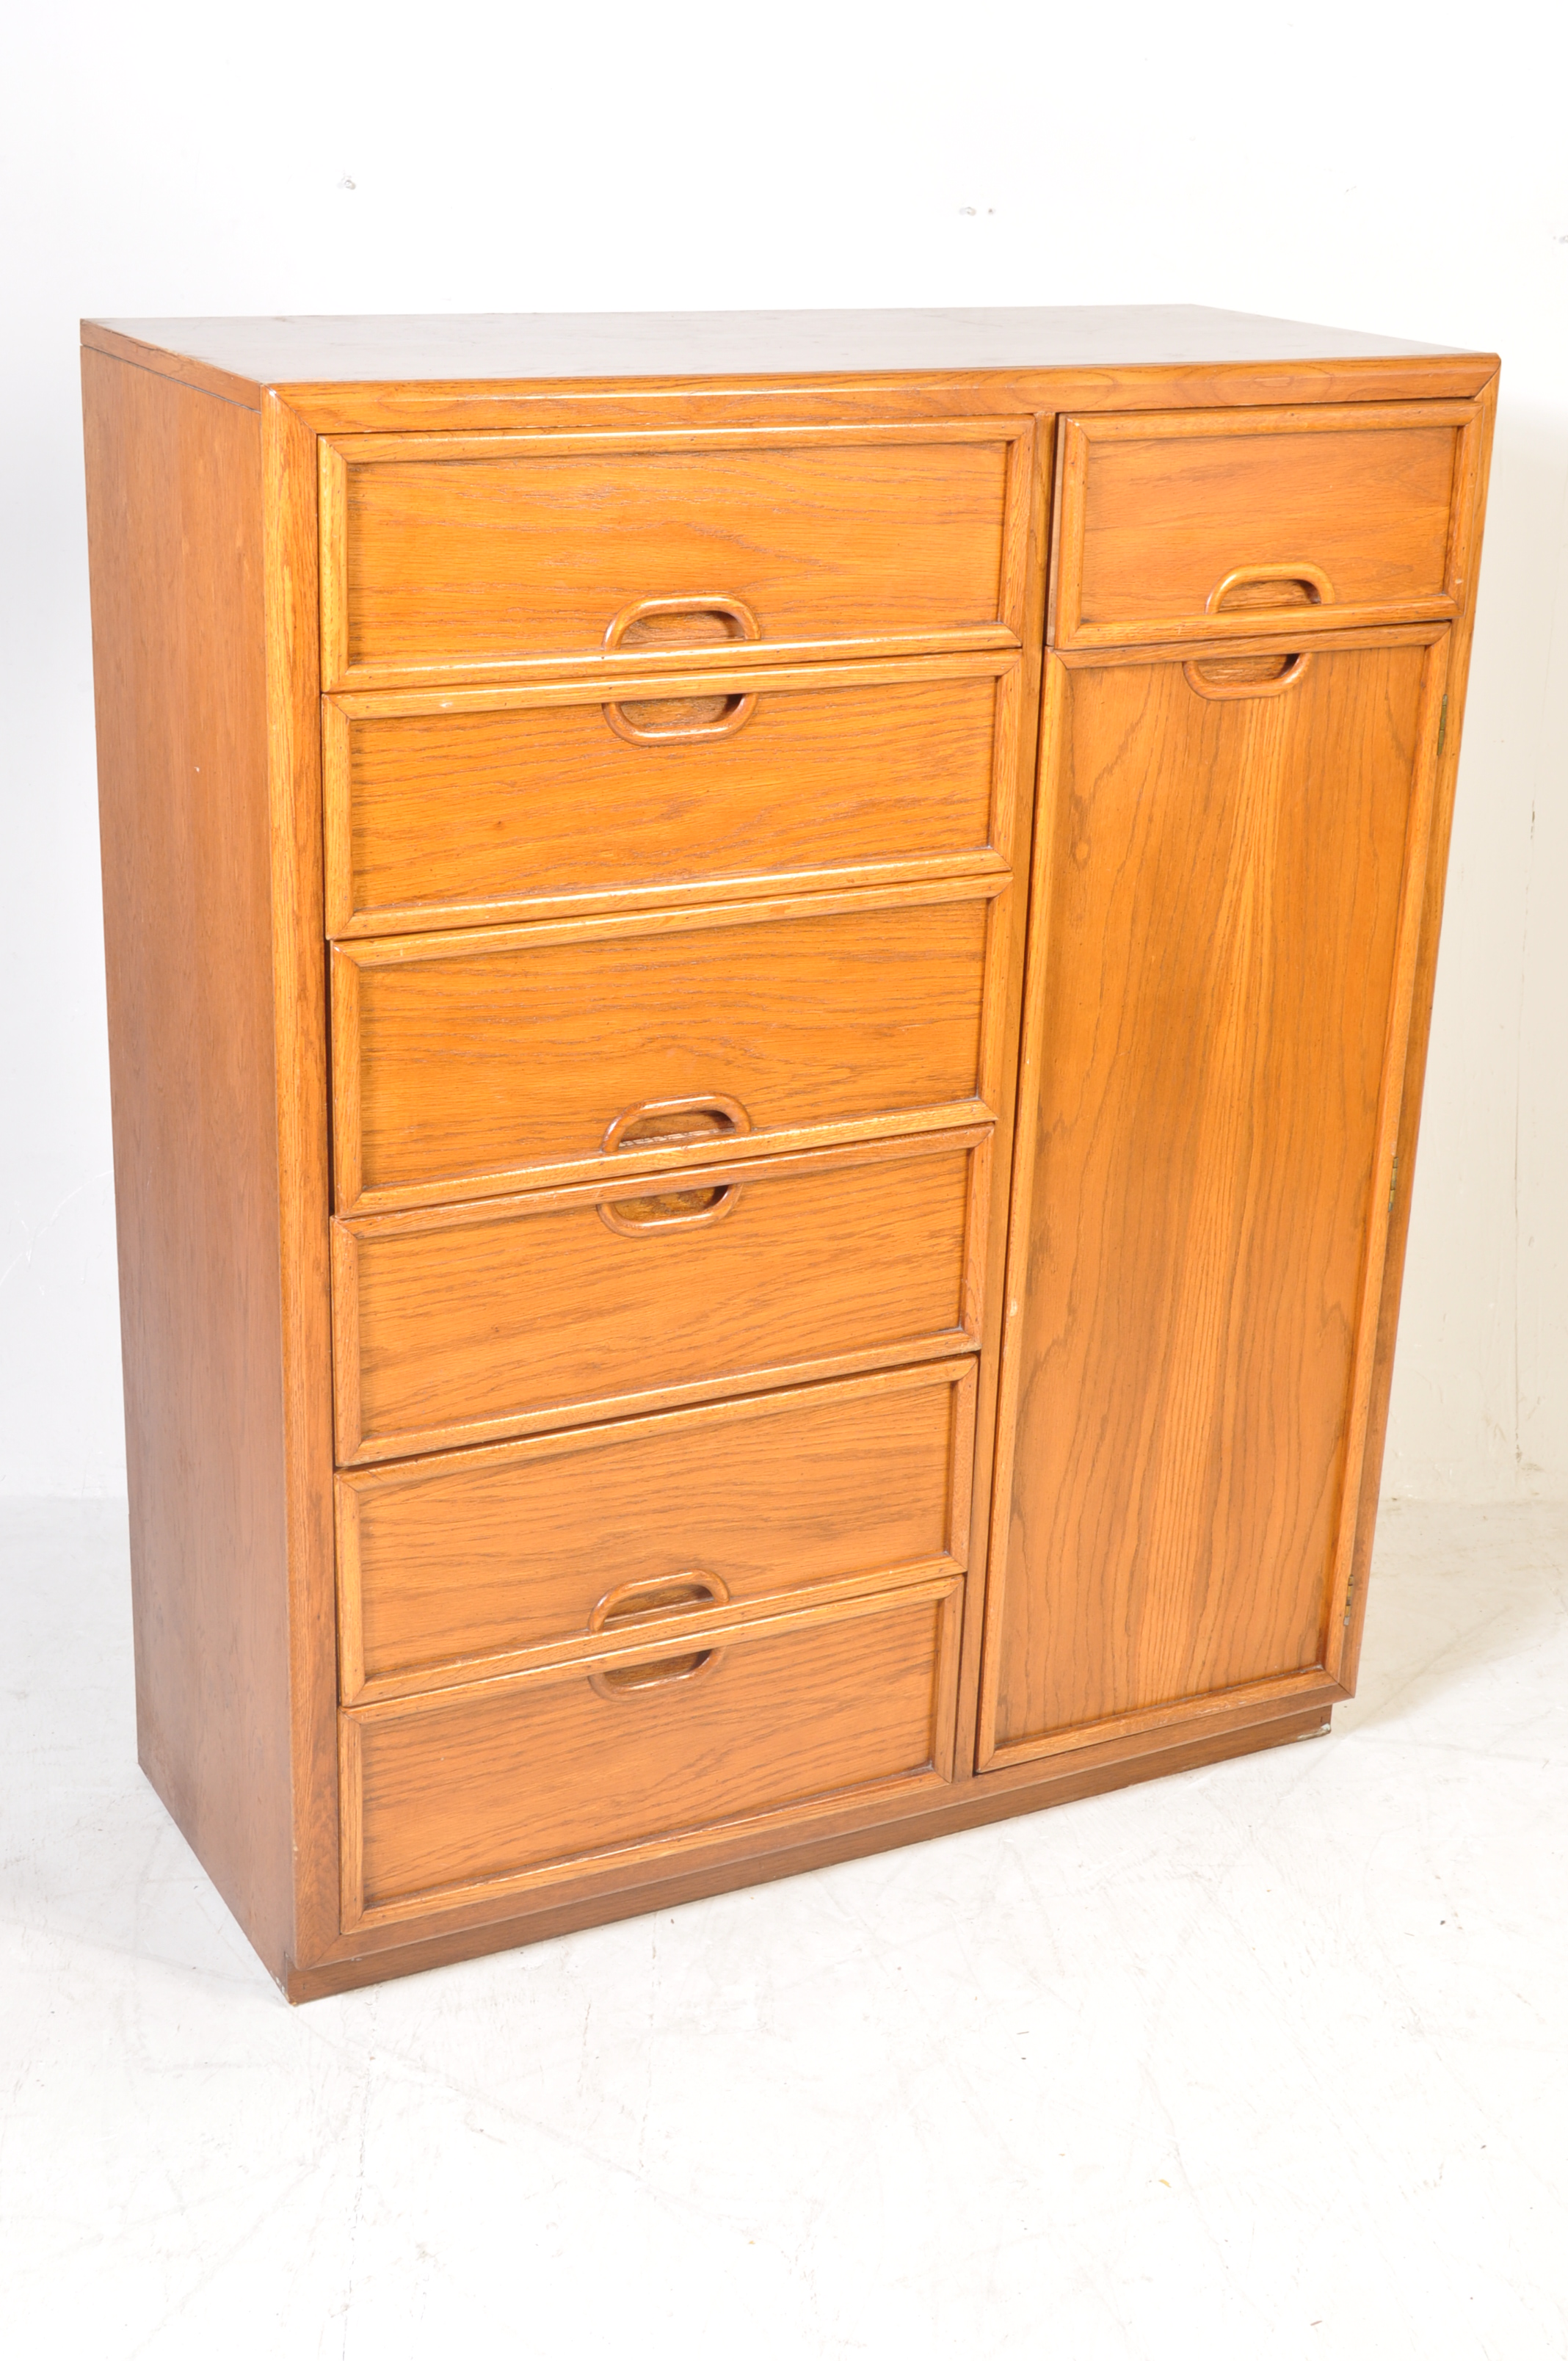 VINTAGE 20TH CENTURY TEAK CHEST OF DRAWERS - Image 3 of 7